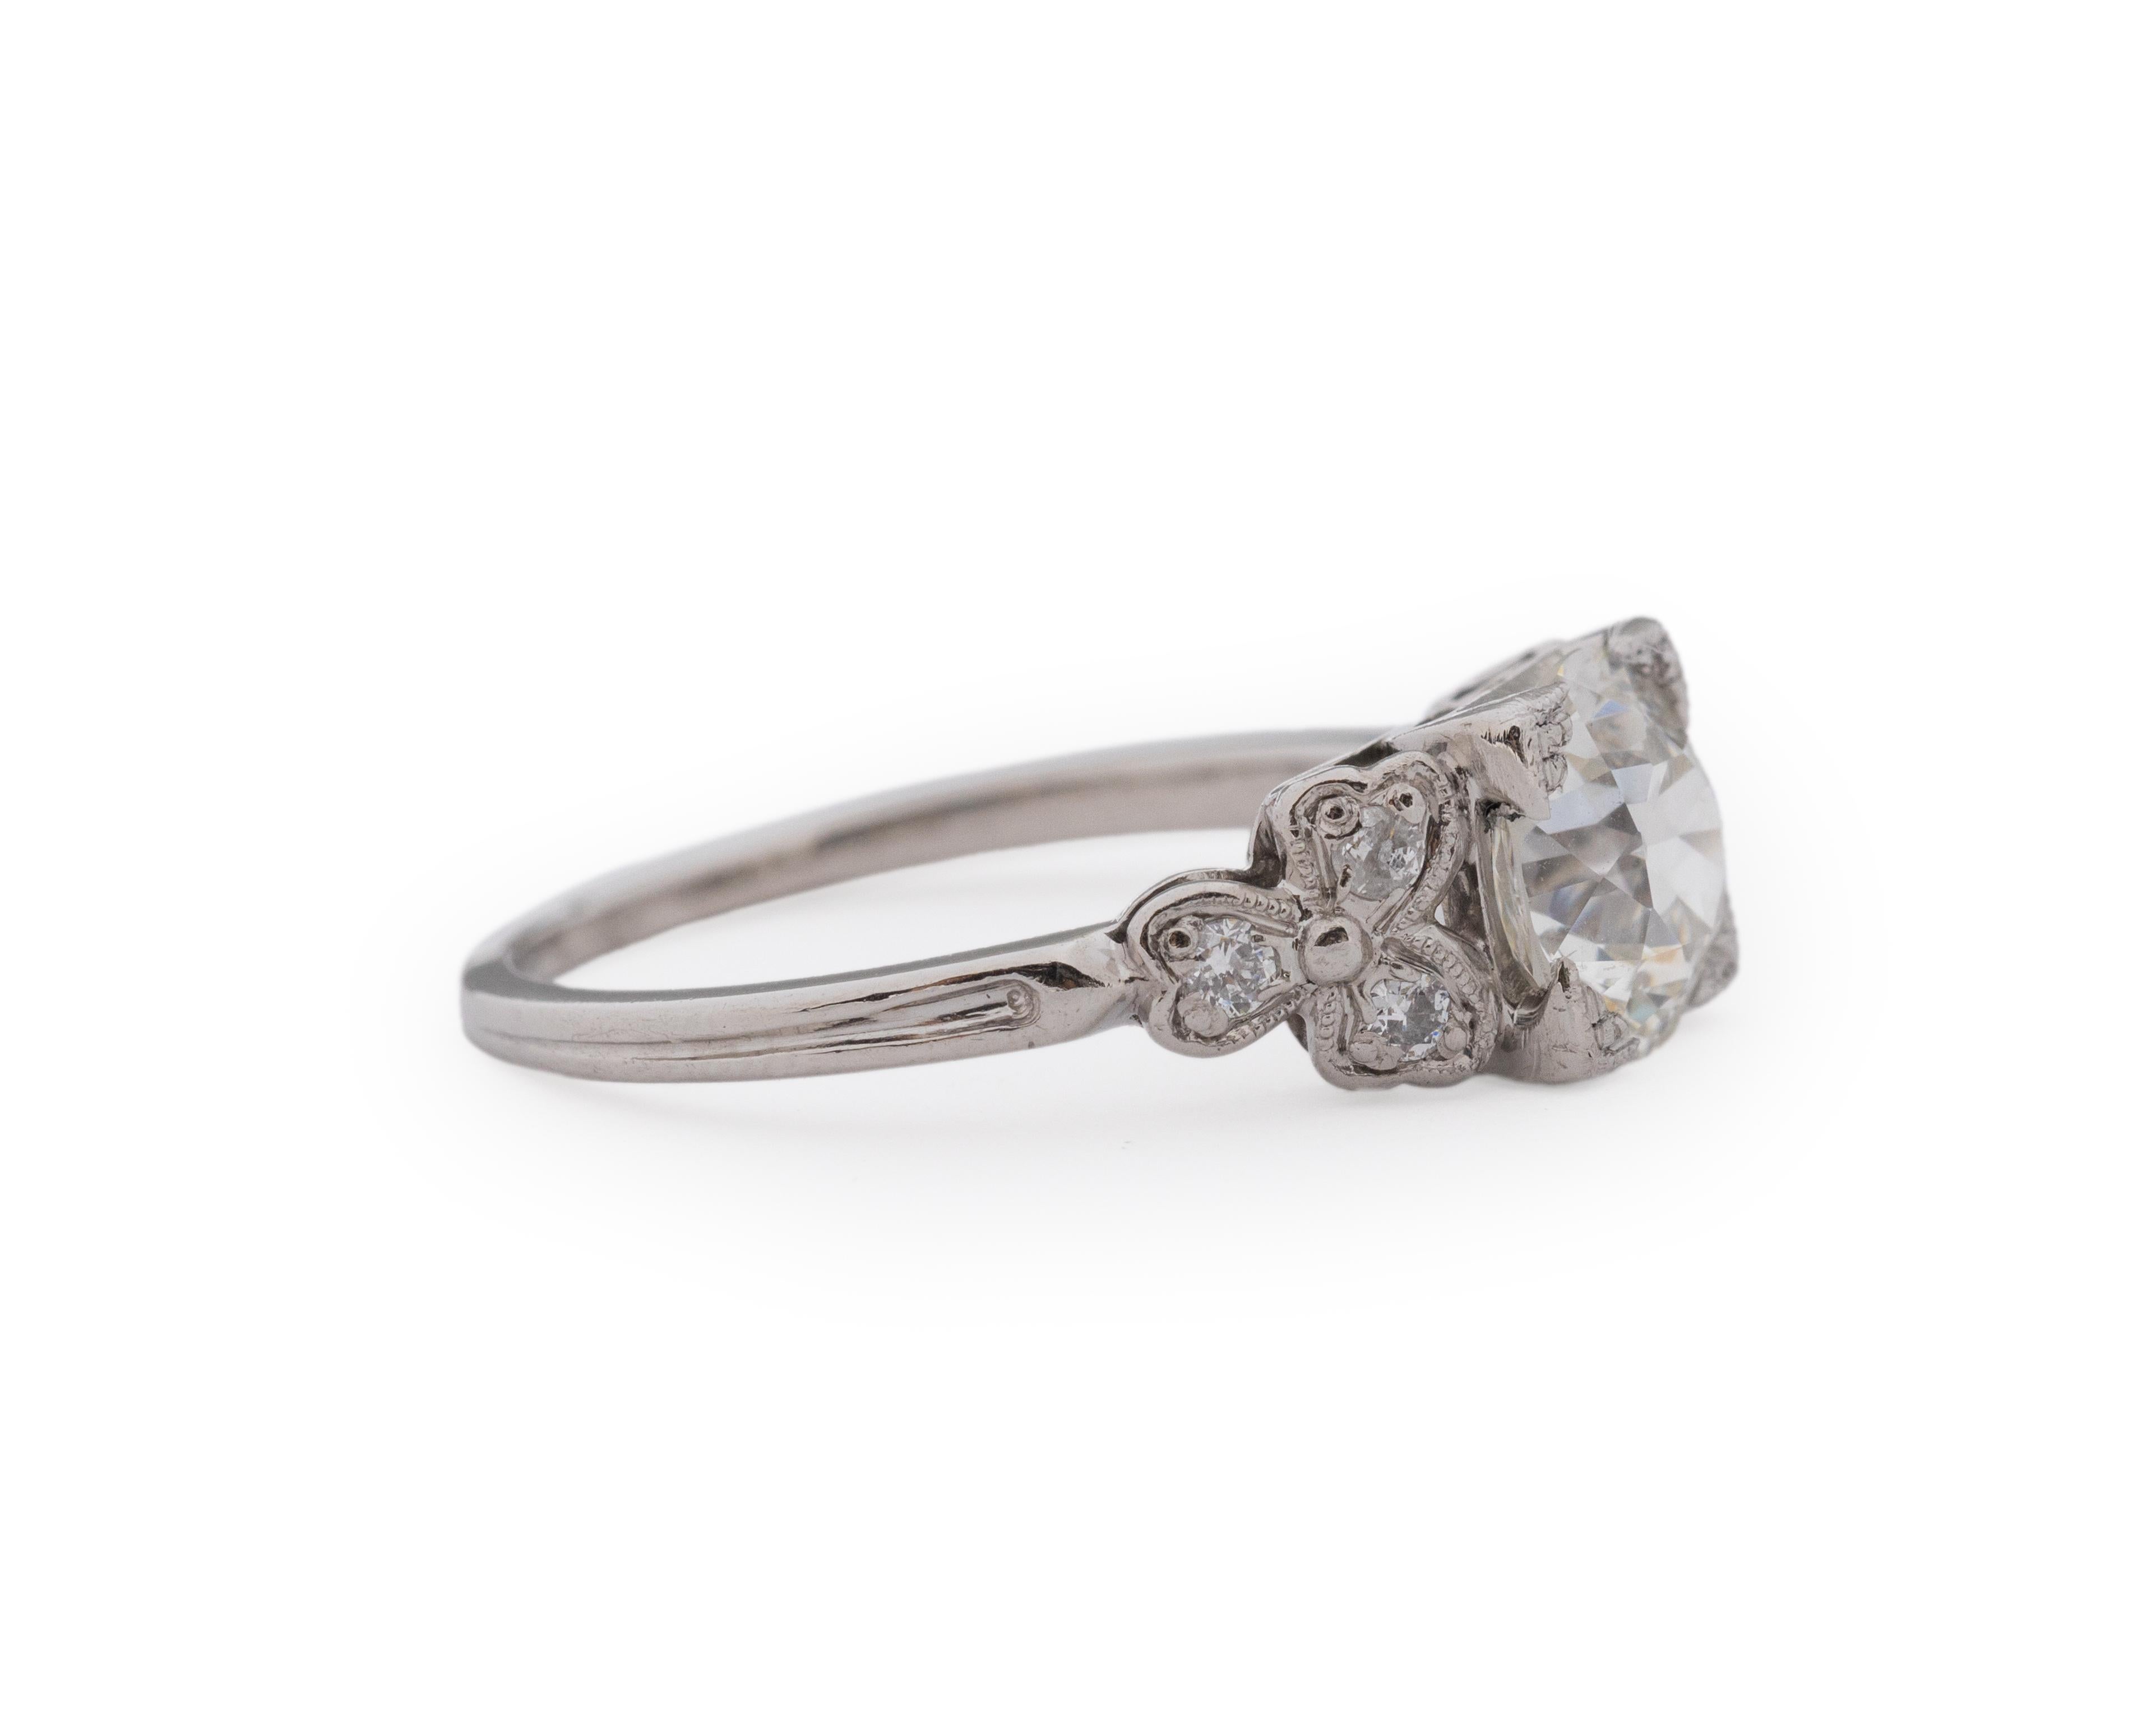 Year: 1920s

Item Details:
Ring Size: 5.5
Metal Type: Platinum [Hallmarked, and Tested]
Weight: 3.5 grams

Center Diamond Details:

GIA Report#:5231213075
Weight: 1.30ct total weight
Cut: Old European brilliant
Color: I
Clarity: VS1
Type: